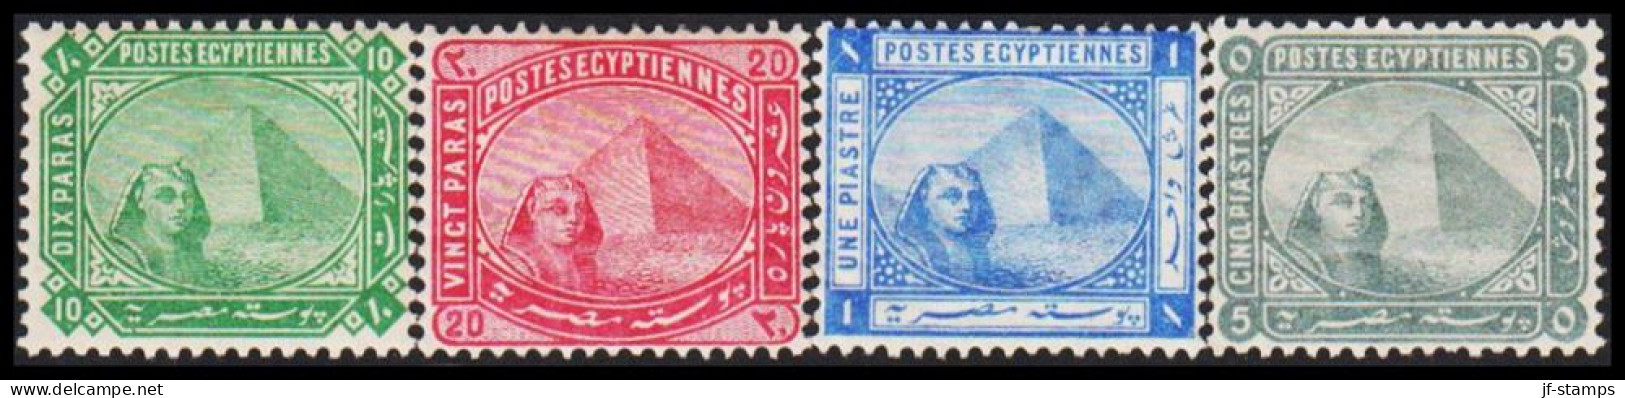 1884-1902. EGYPT. Sphinx & Pyramid In Complete Set With 4 Stamps  Hinged. (Michel 32-35) - JF545273 - 1866-1914 Khedivate Of Egypt